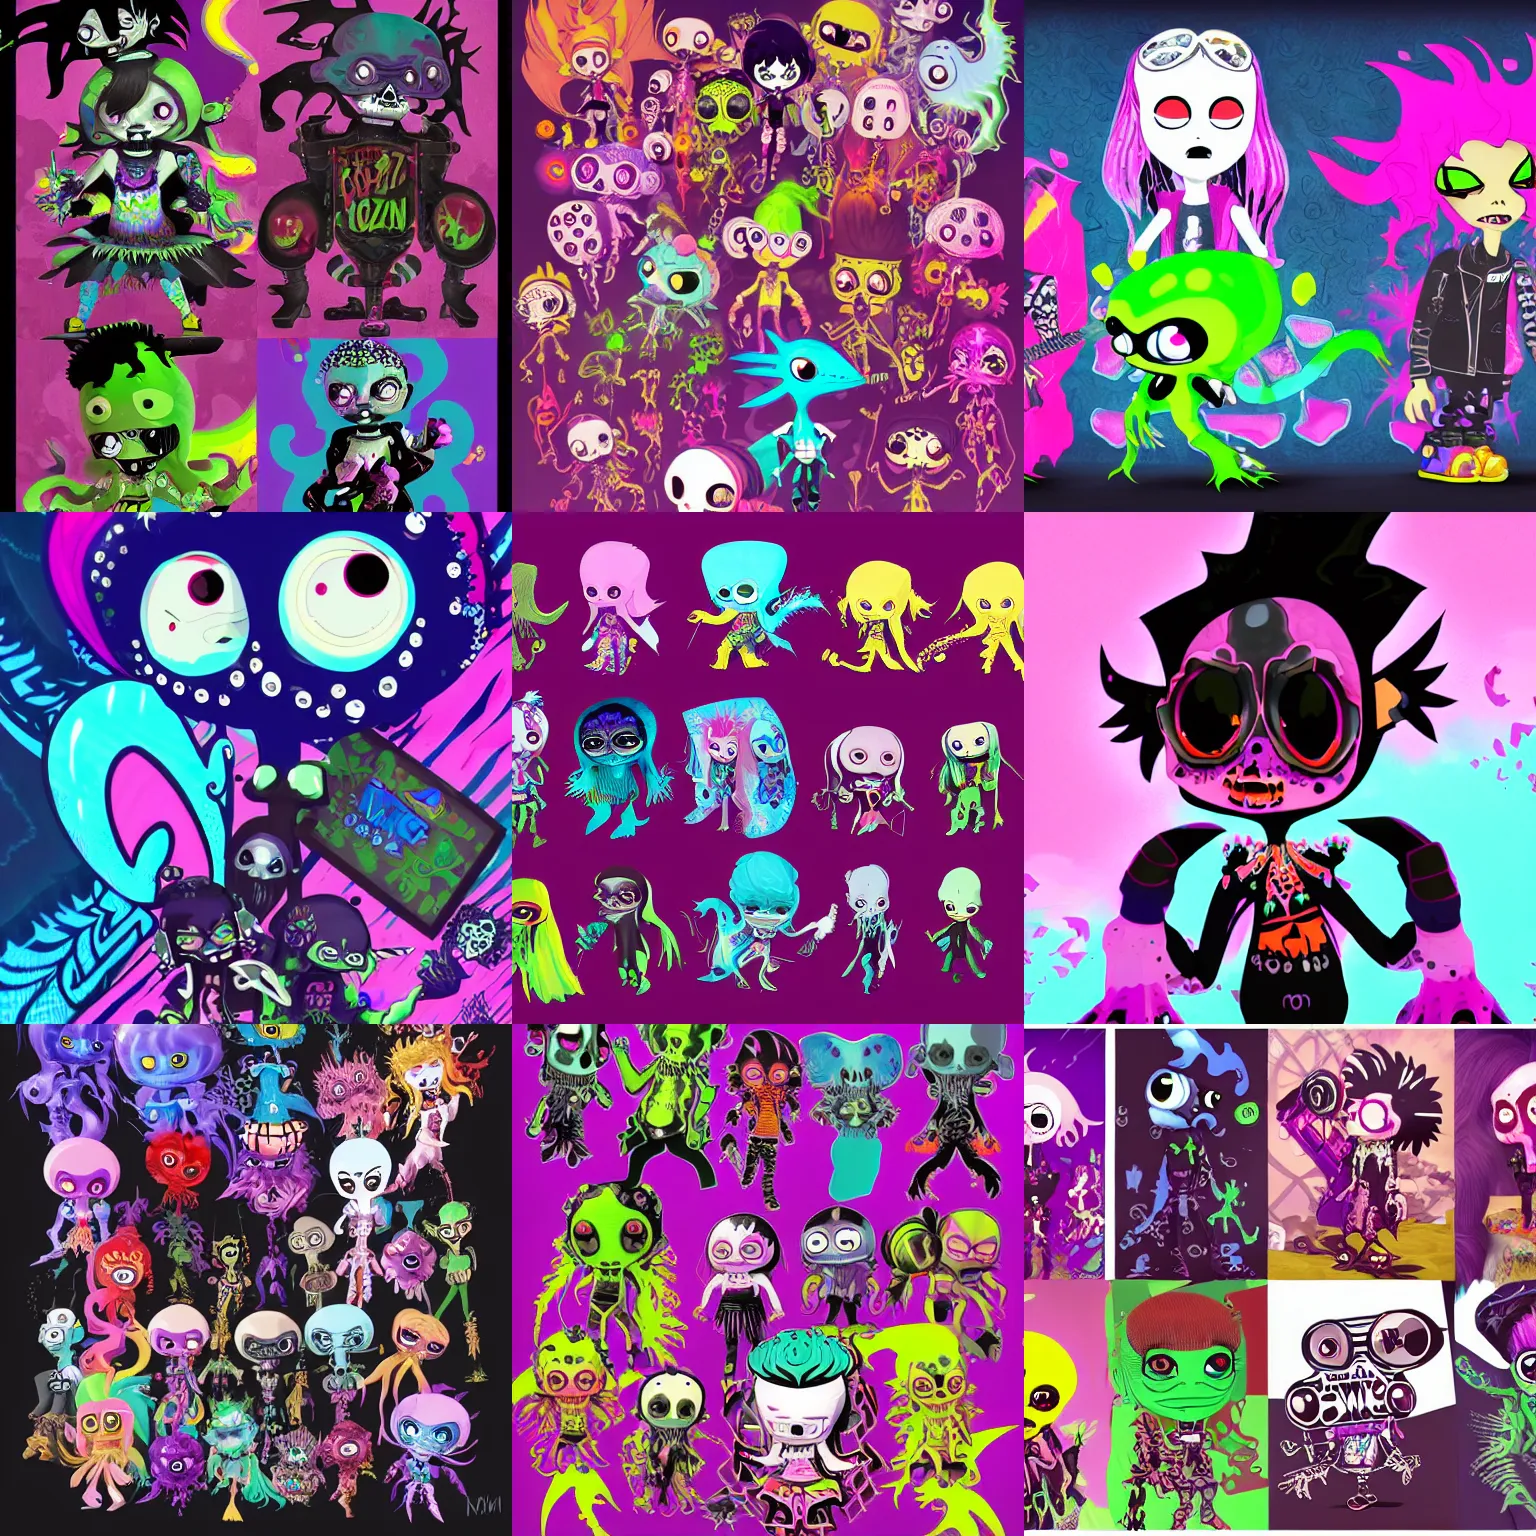 Prompt: CGI lisa frank gothic punk vampiric rockstar underwater caustics vampire squid character designs of various shapes and sizes by genndy tartakovsky and ruby gloom by martin hsu and the creators of fret nice at pieces interactive and splatoon by nintendo and psychonauts by doublefines tim shafer being overseen by Jamie Hewlett from gorillaz for splatoon by nintendo